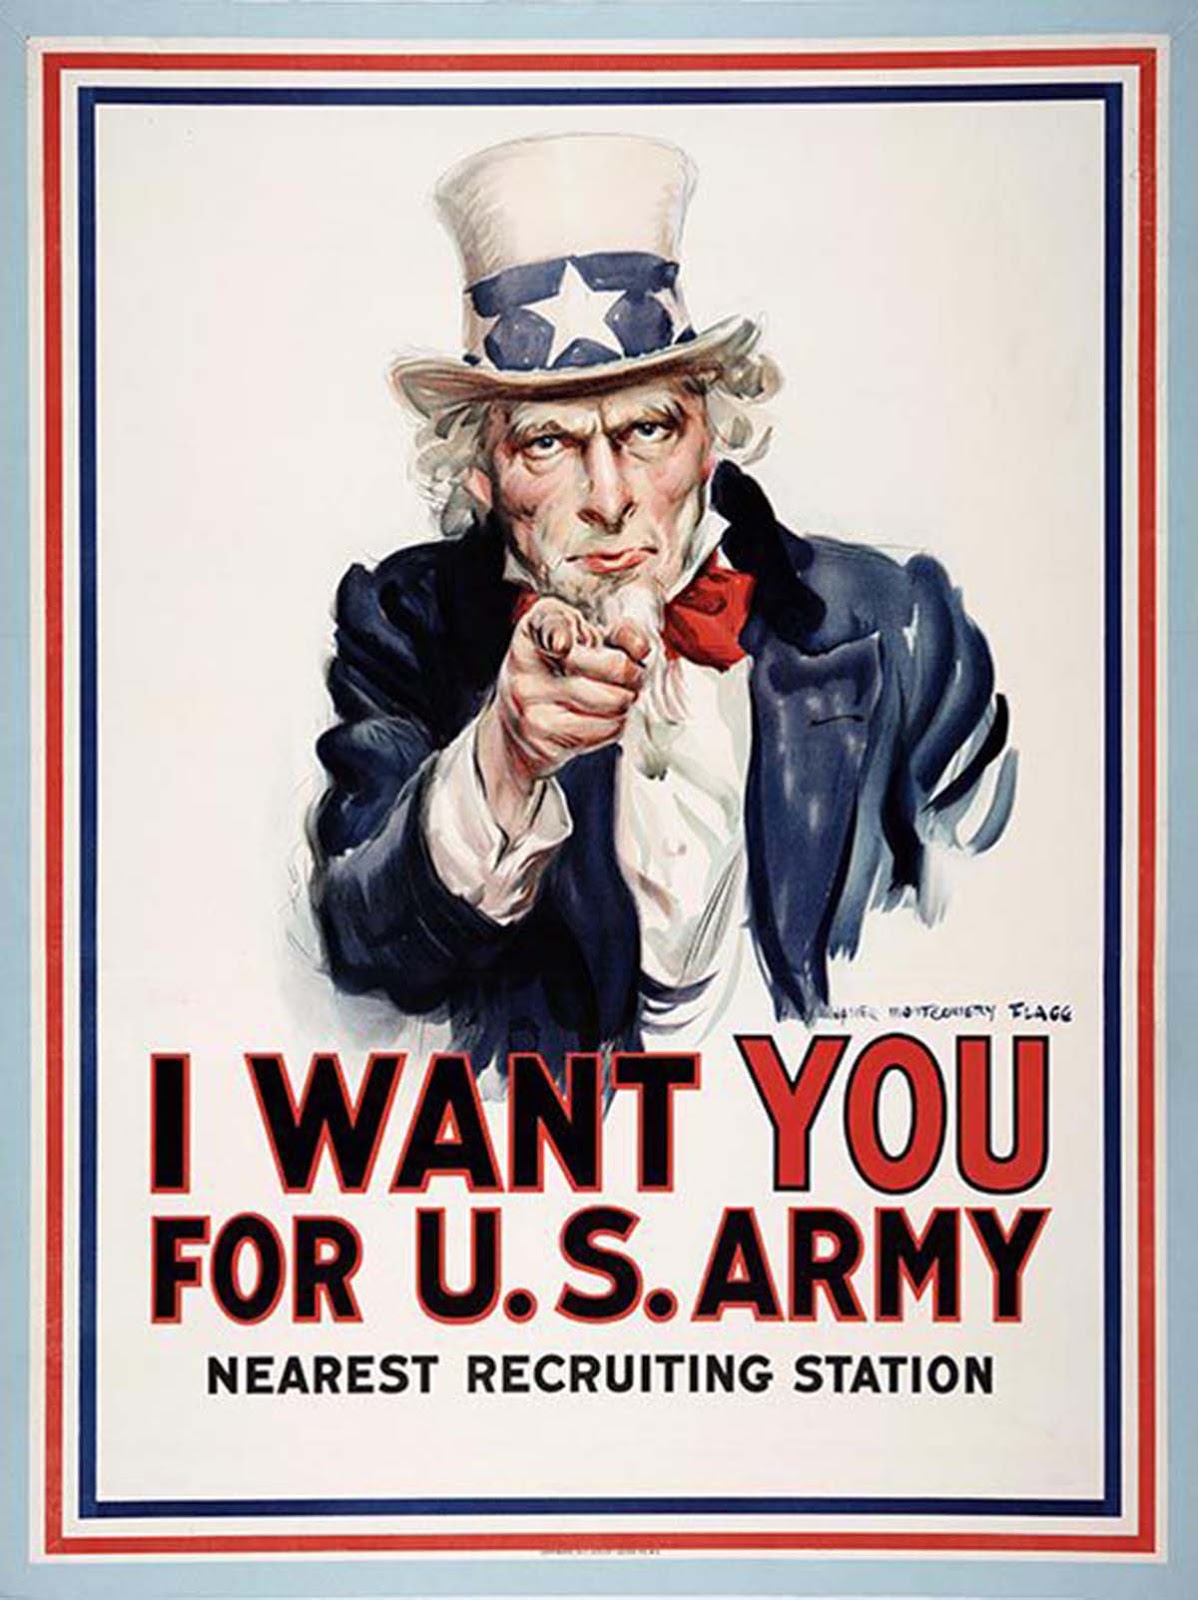 I Want You for U.S. Army, 1917, James Montgomery Flagg.